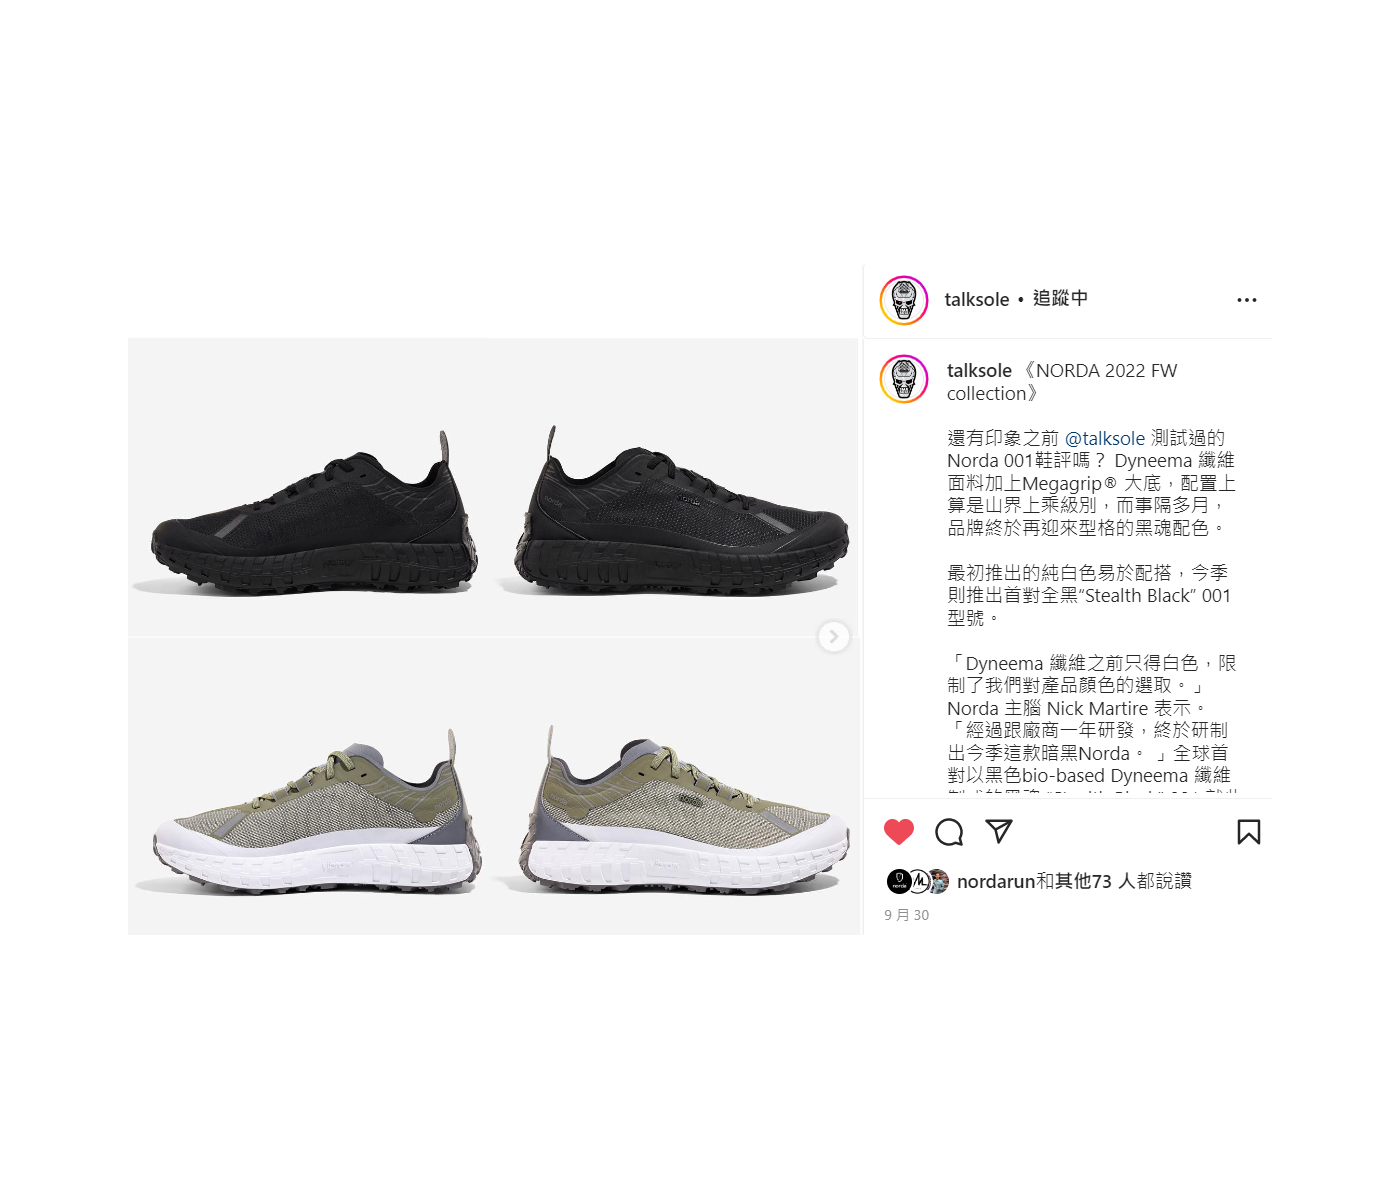 talksole:《NORDA 2022 FW collection》